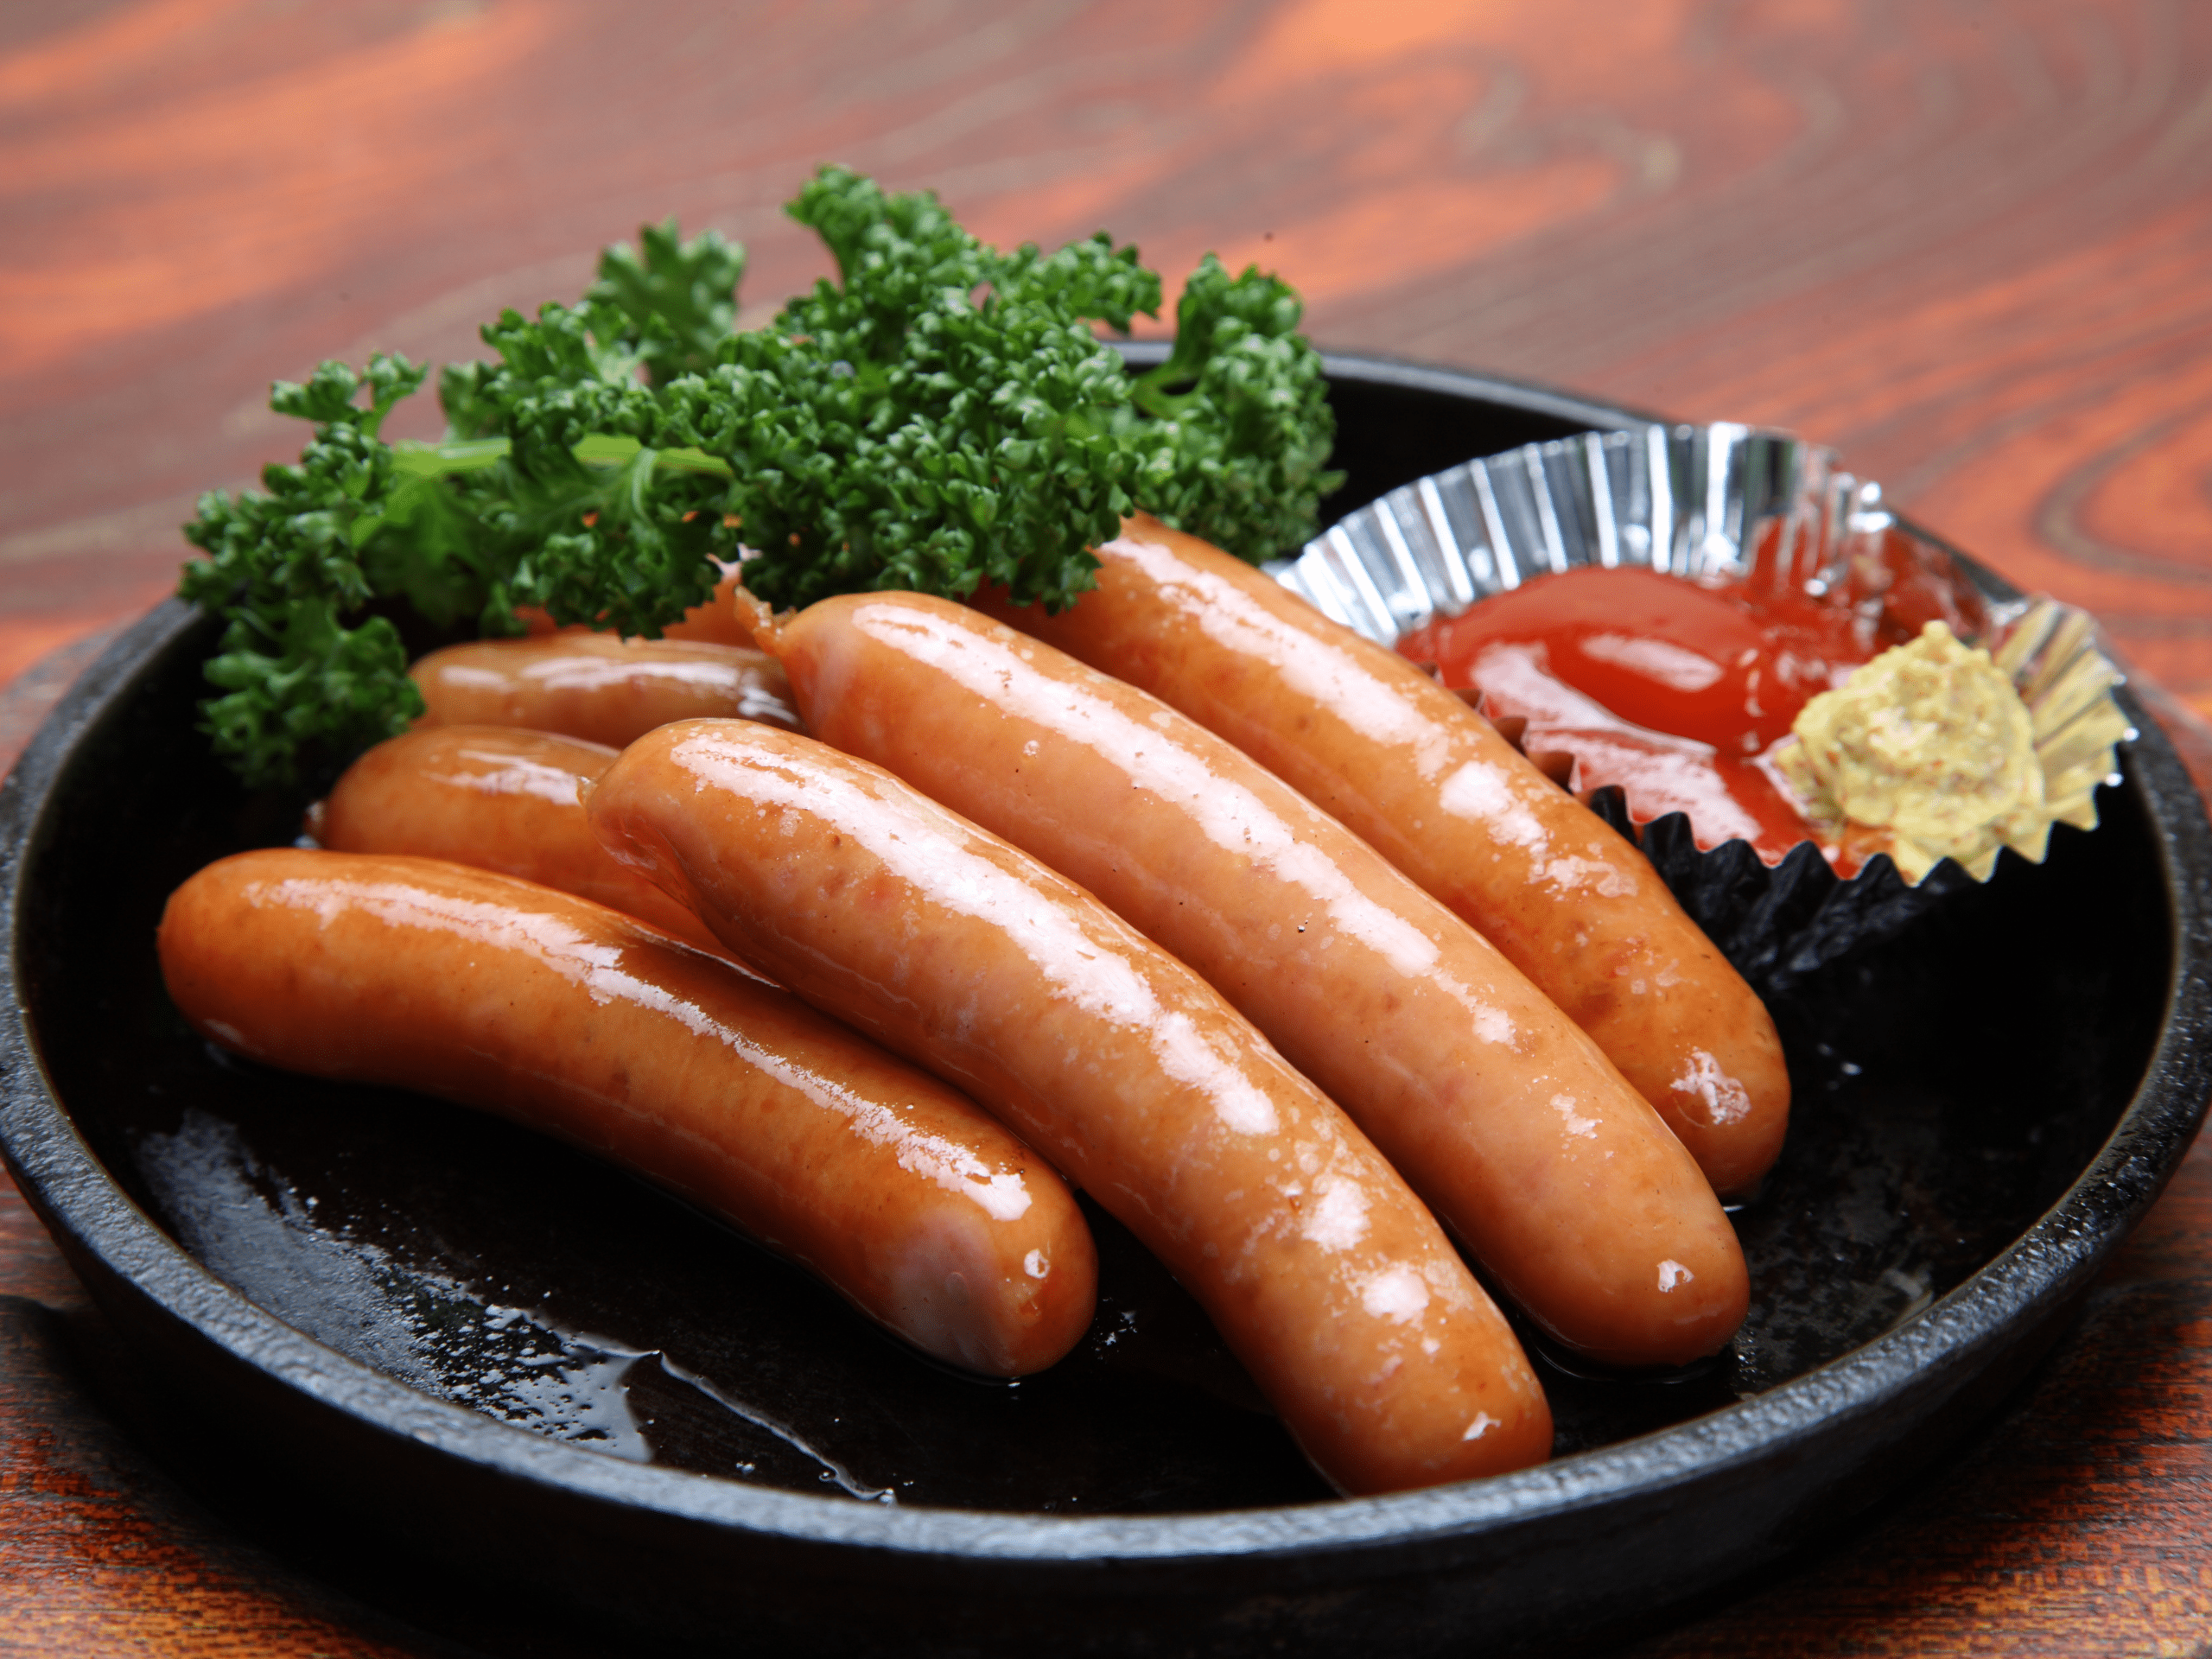 Northumberland famous delicious pork sausage